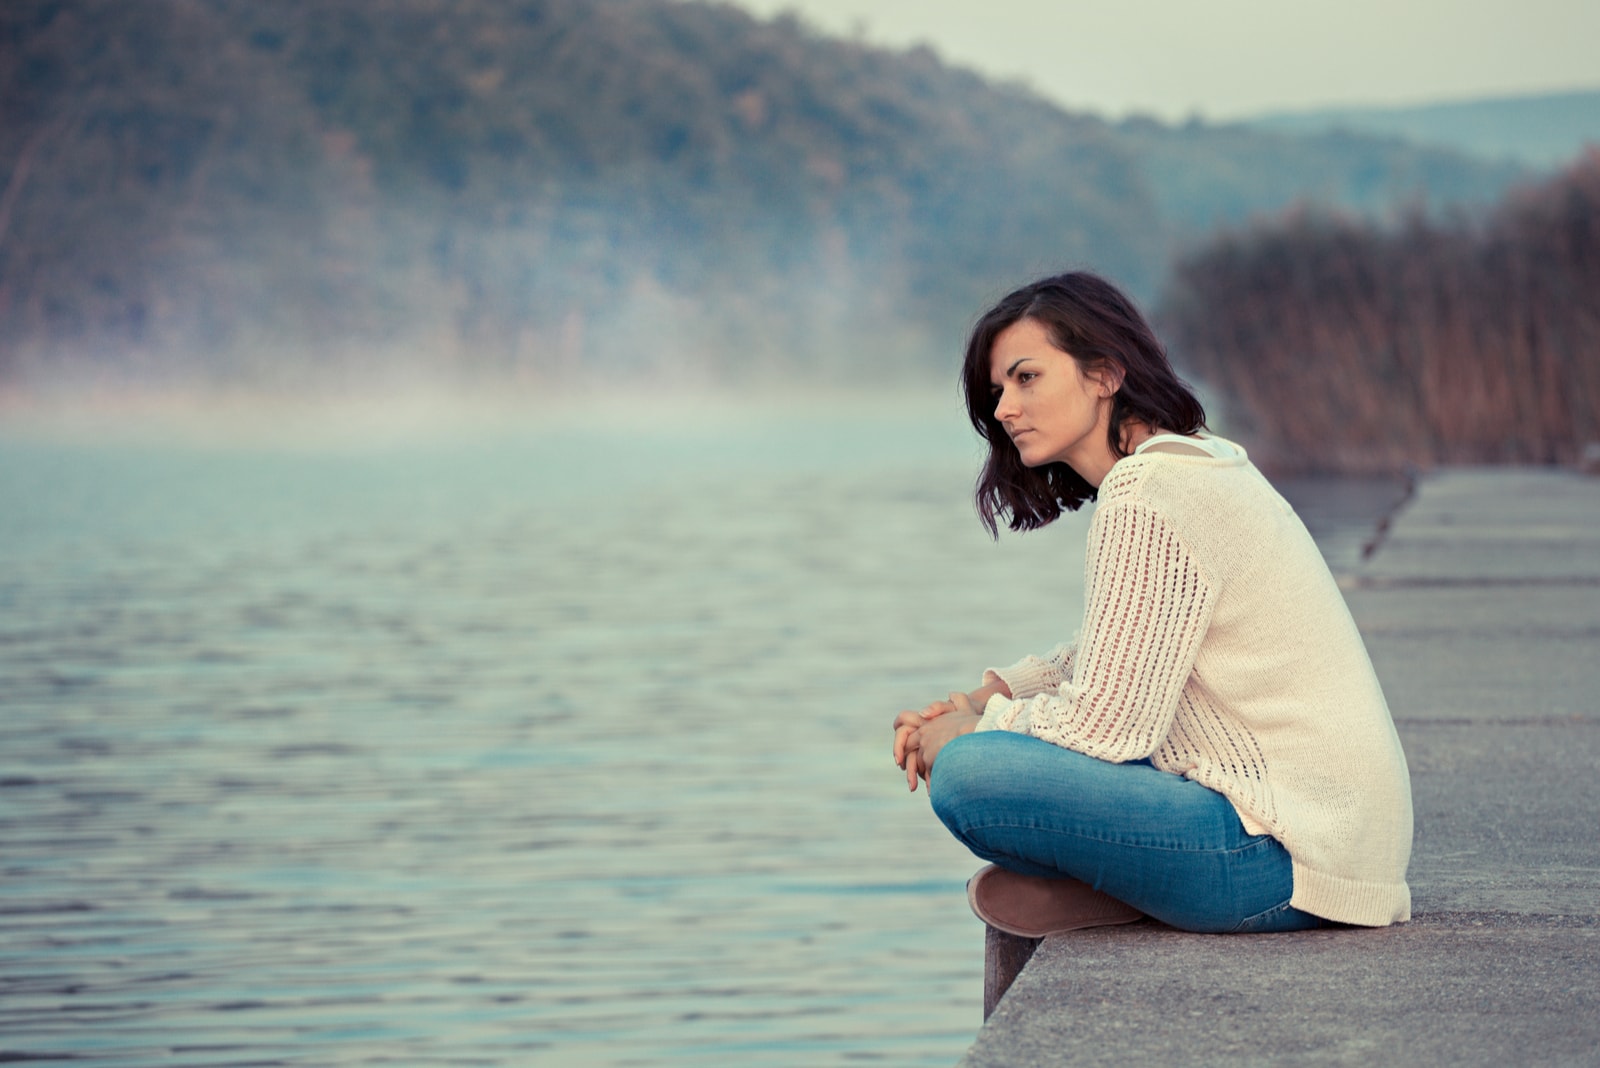 the woman sits pensively beside the pier